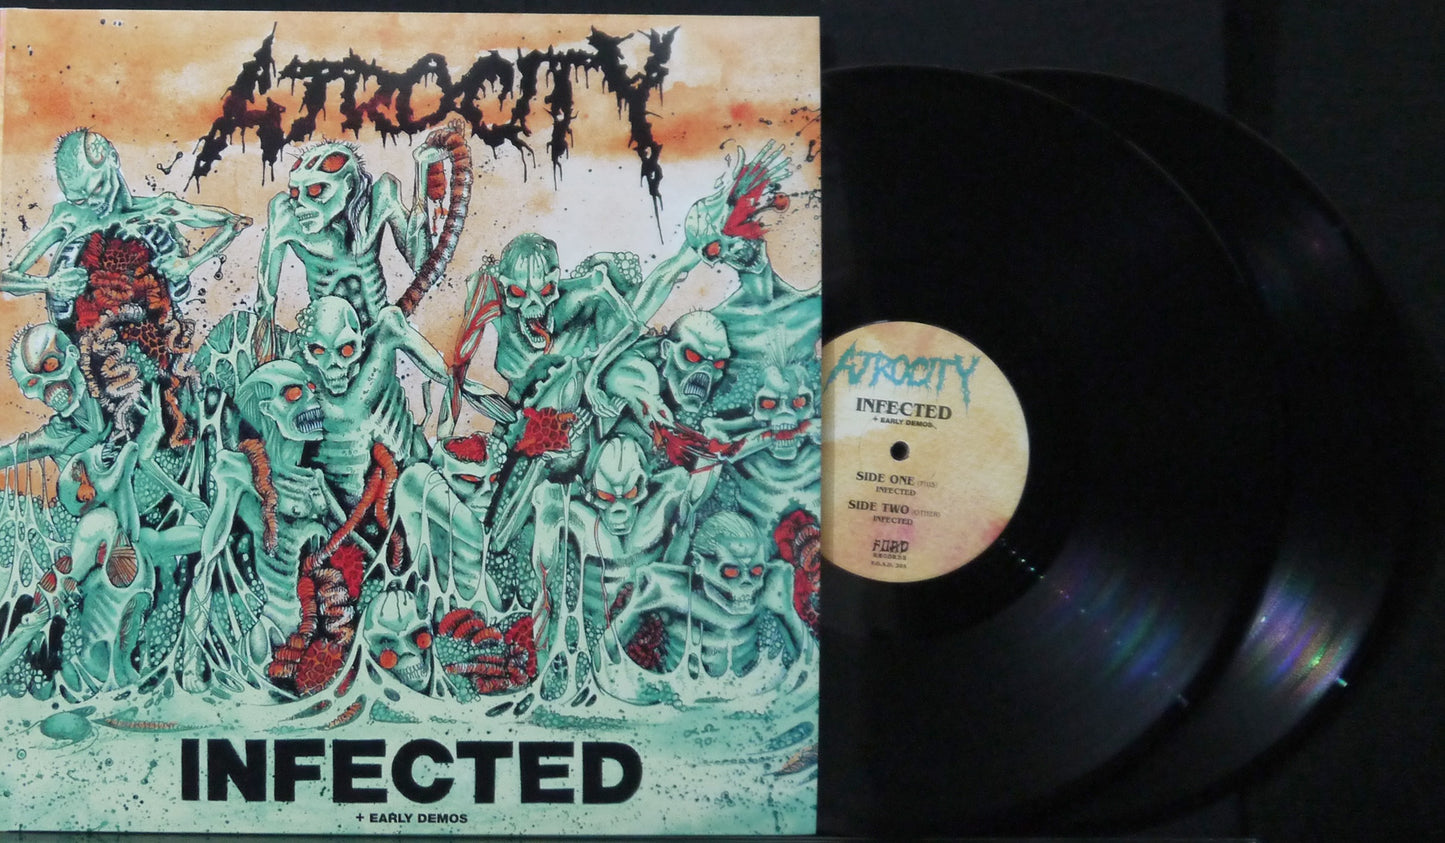 ATROCITY - Infected + Early Demos 2x12"